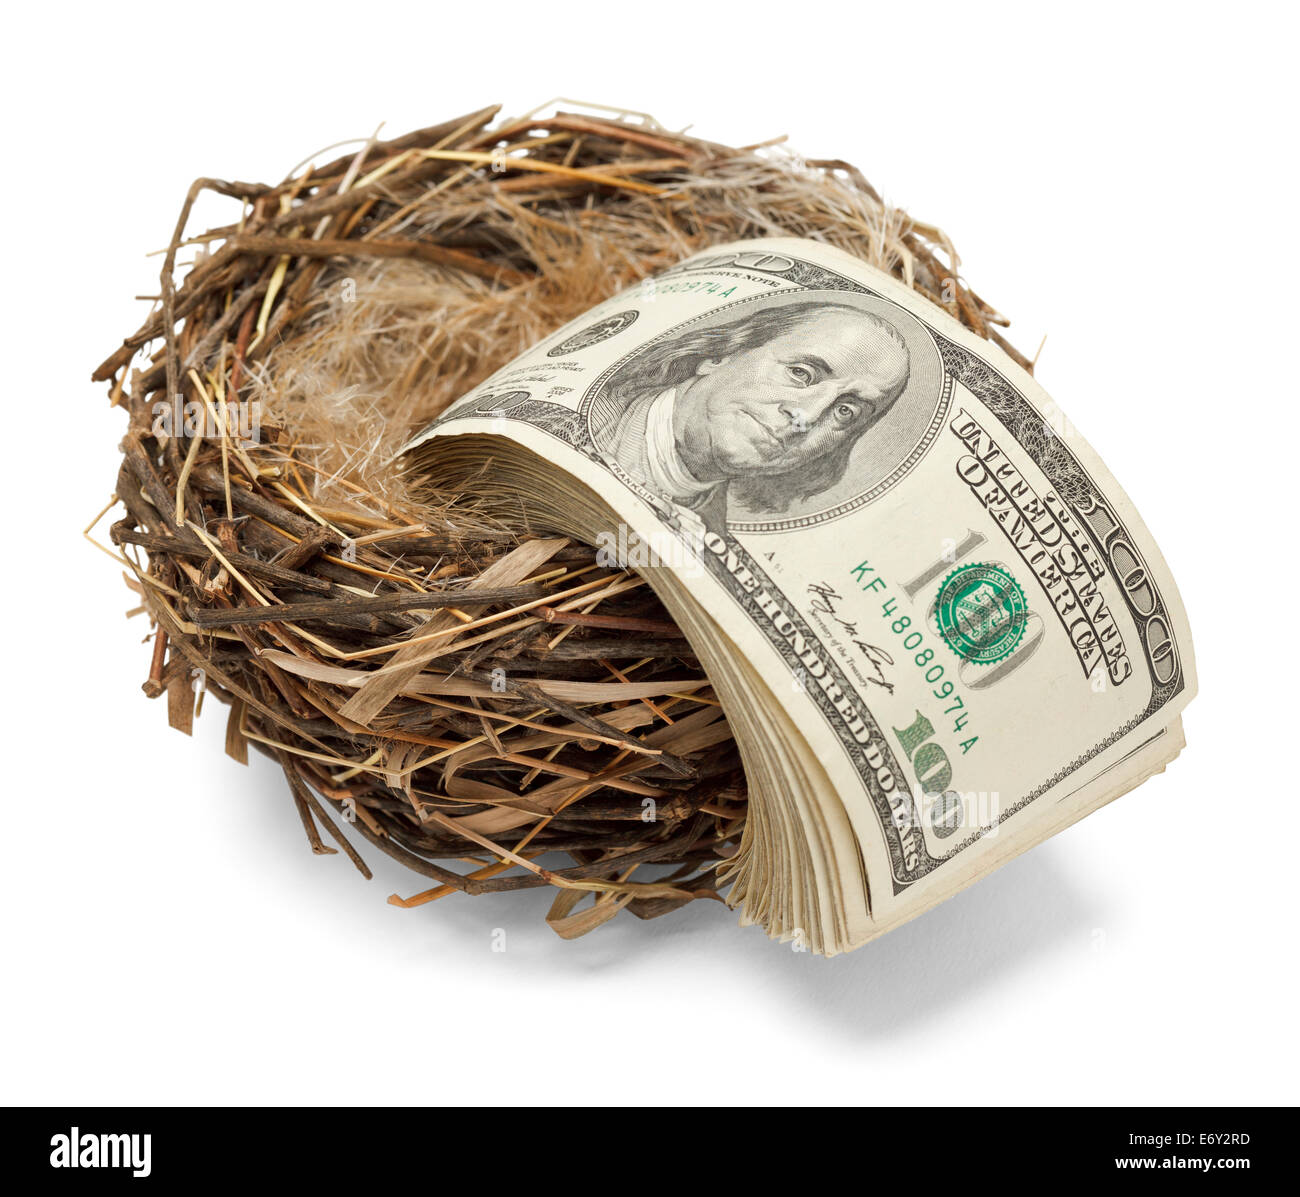 Money leaving the nest as if losing ones retirement. Stock Photo